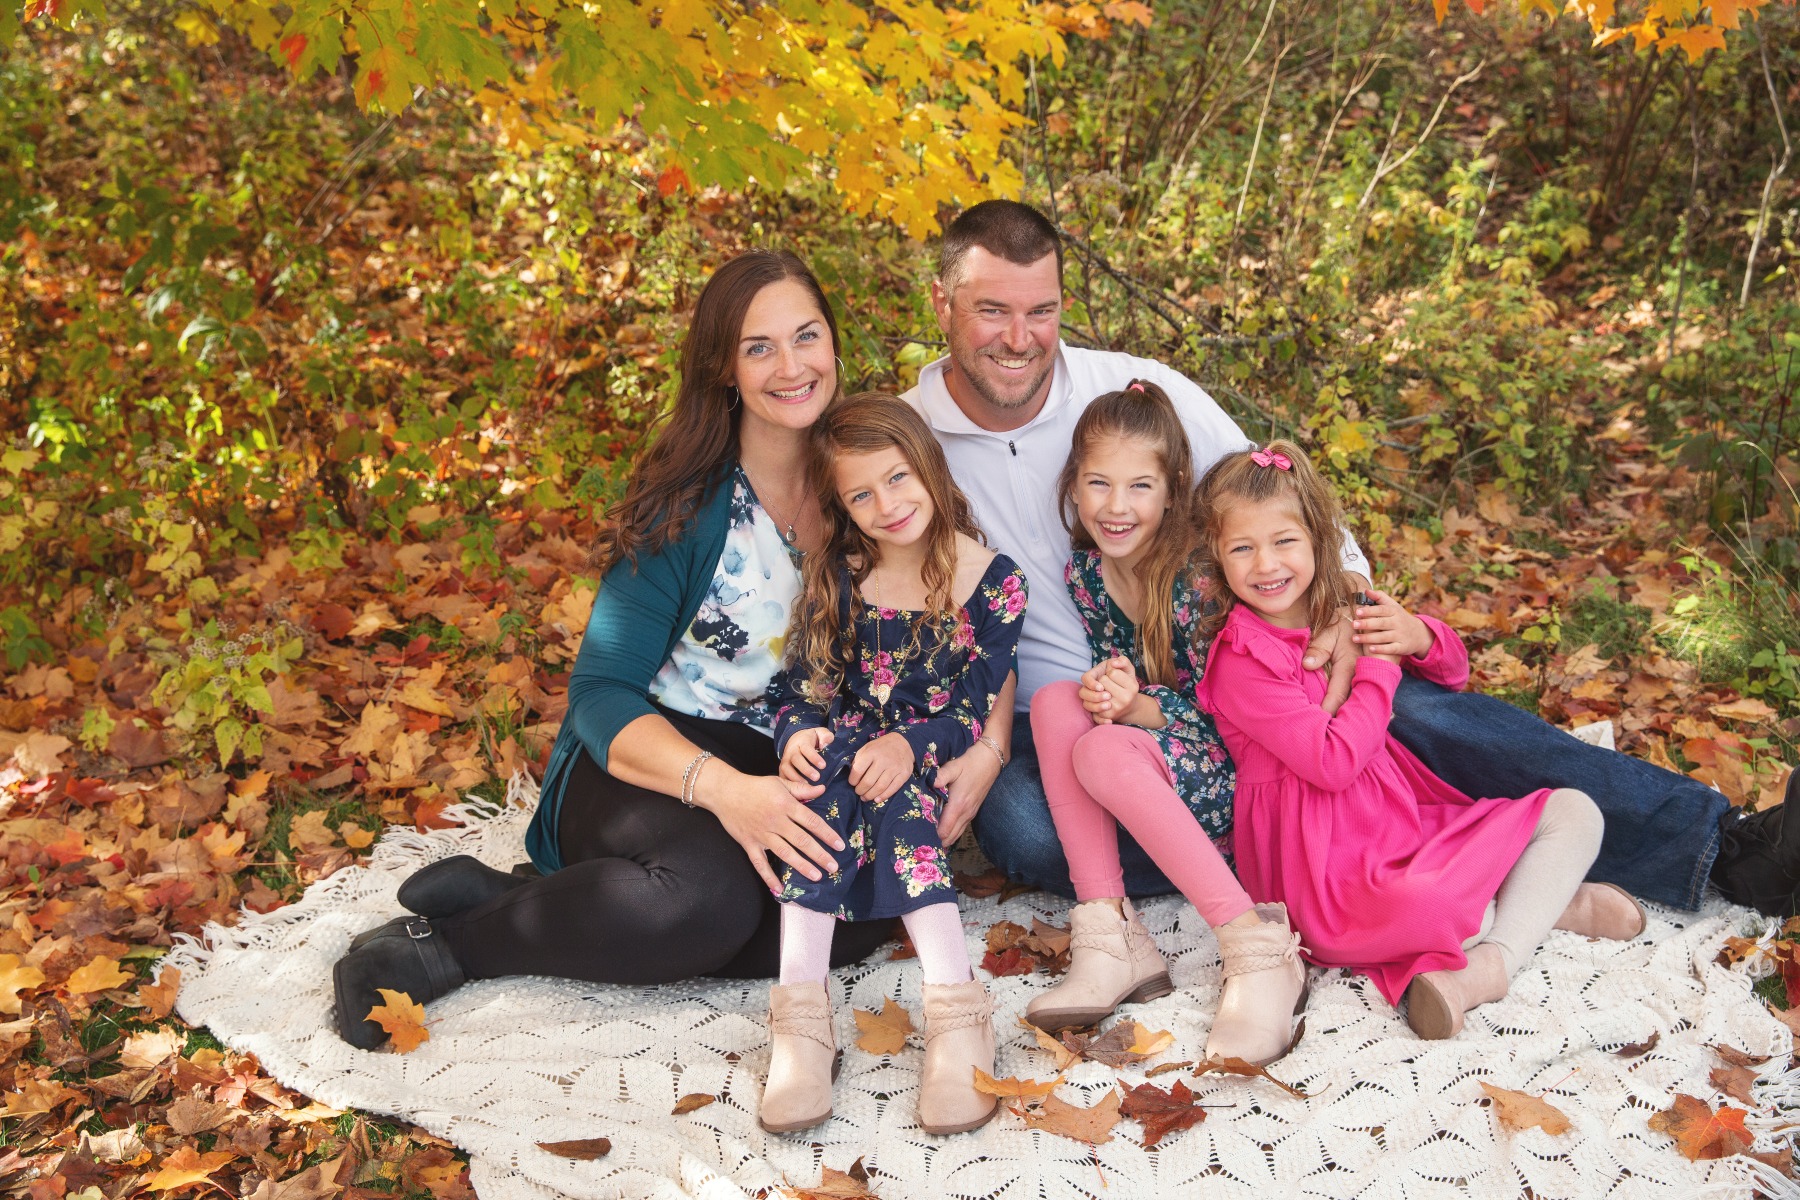 mom & dad and three young girls smile for a family photo in fall leaves